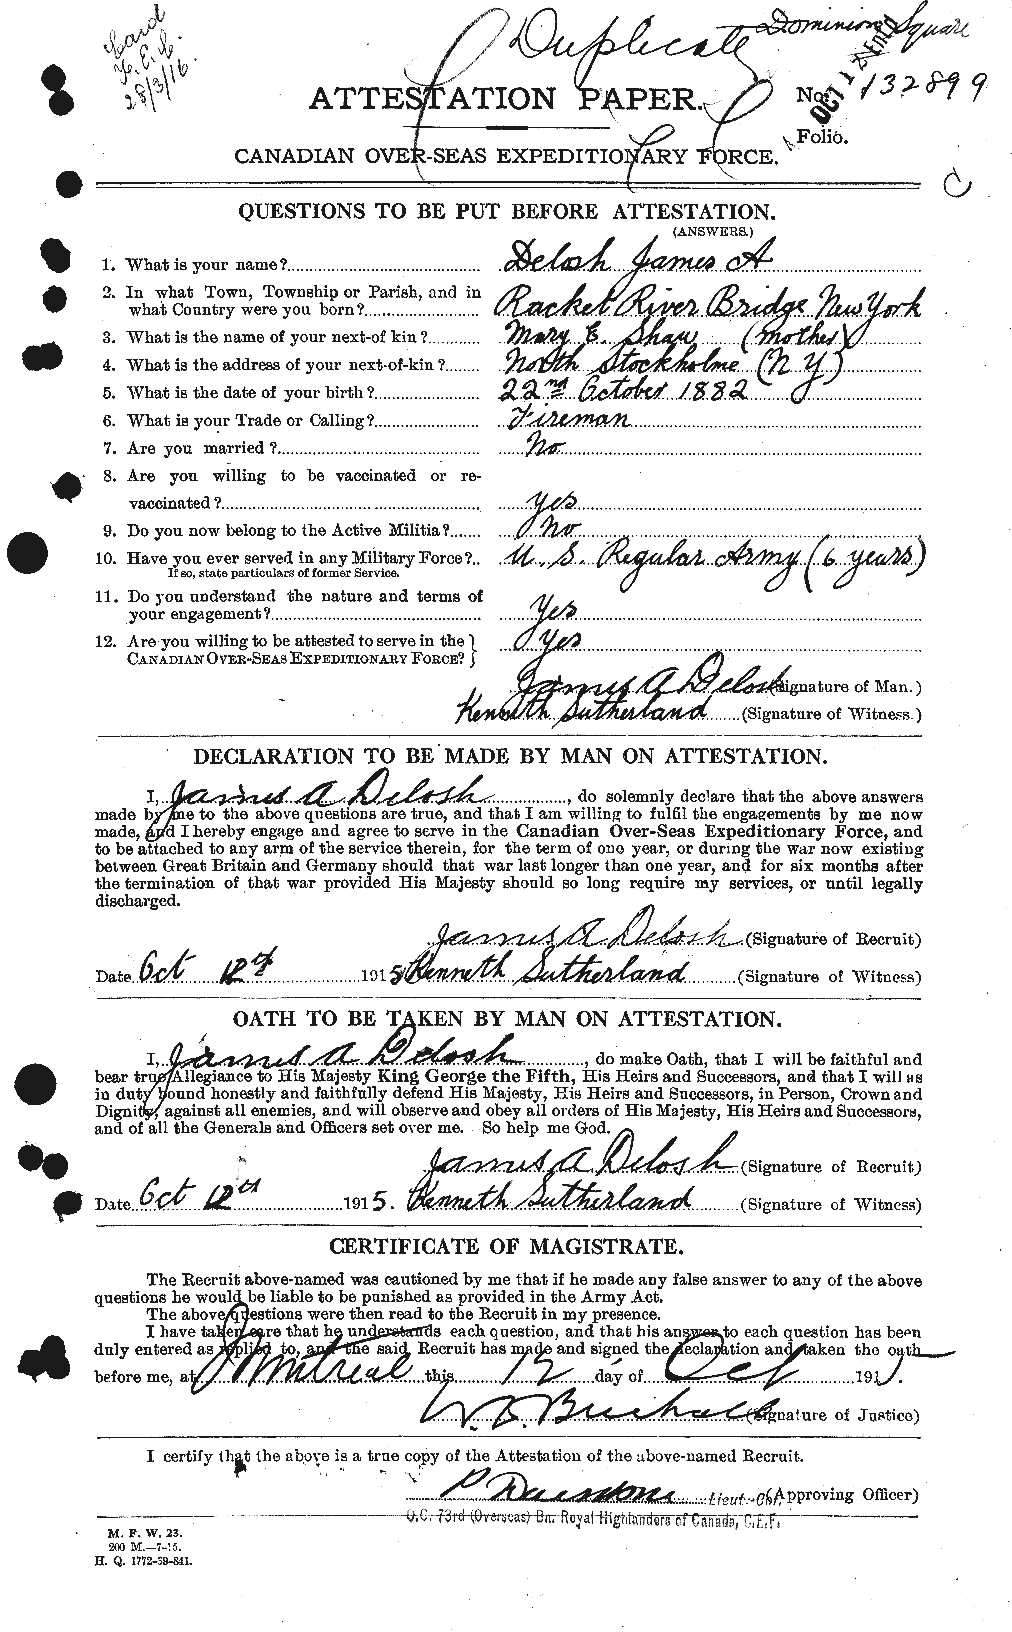 Personnel Records of the First World War - CEF 287677a